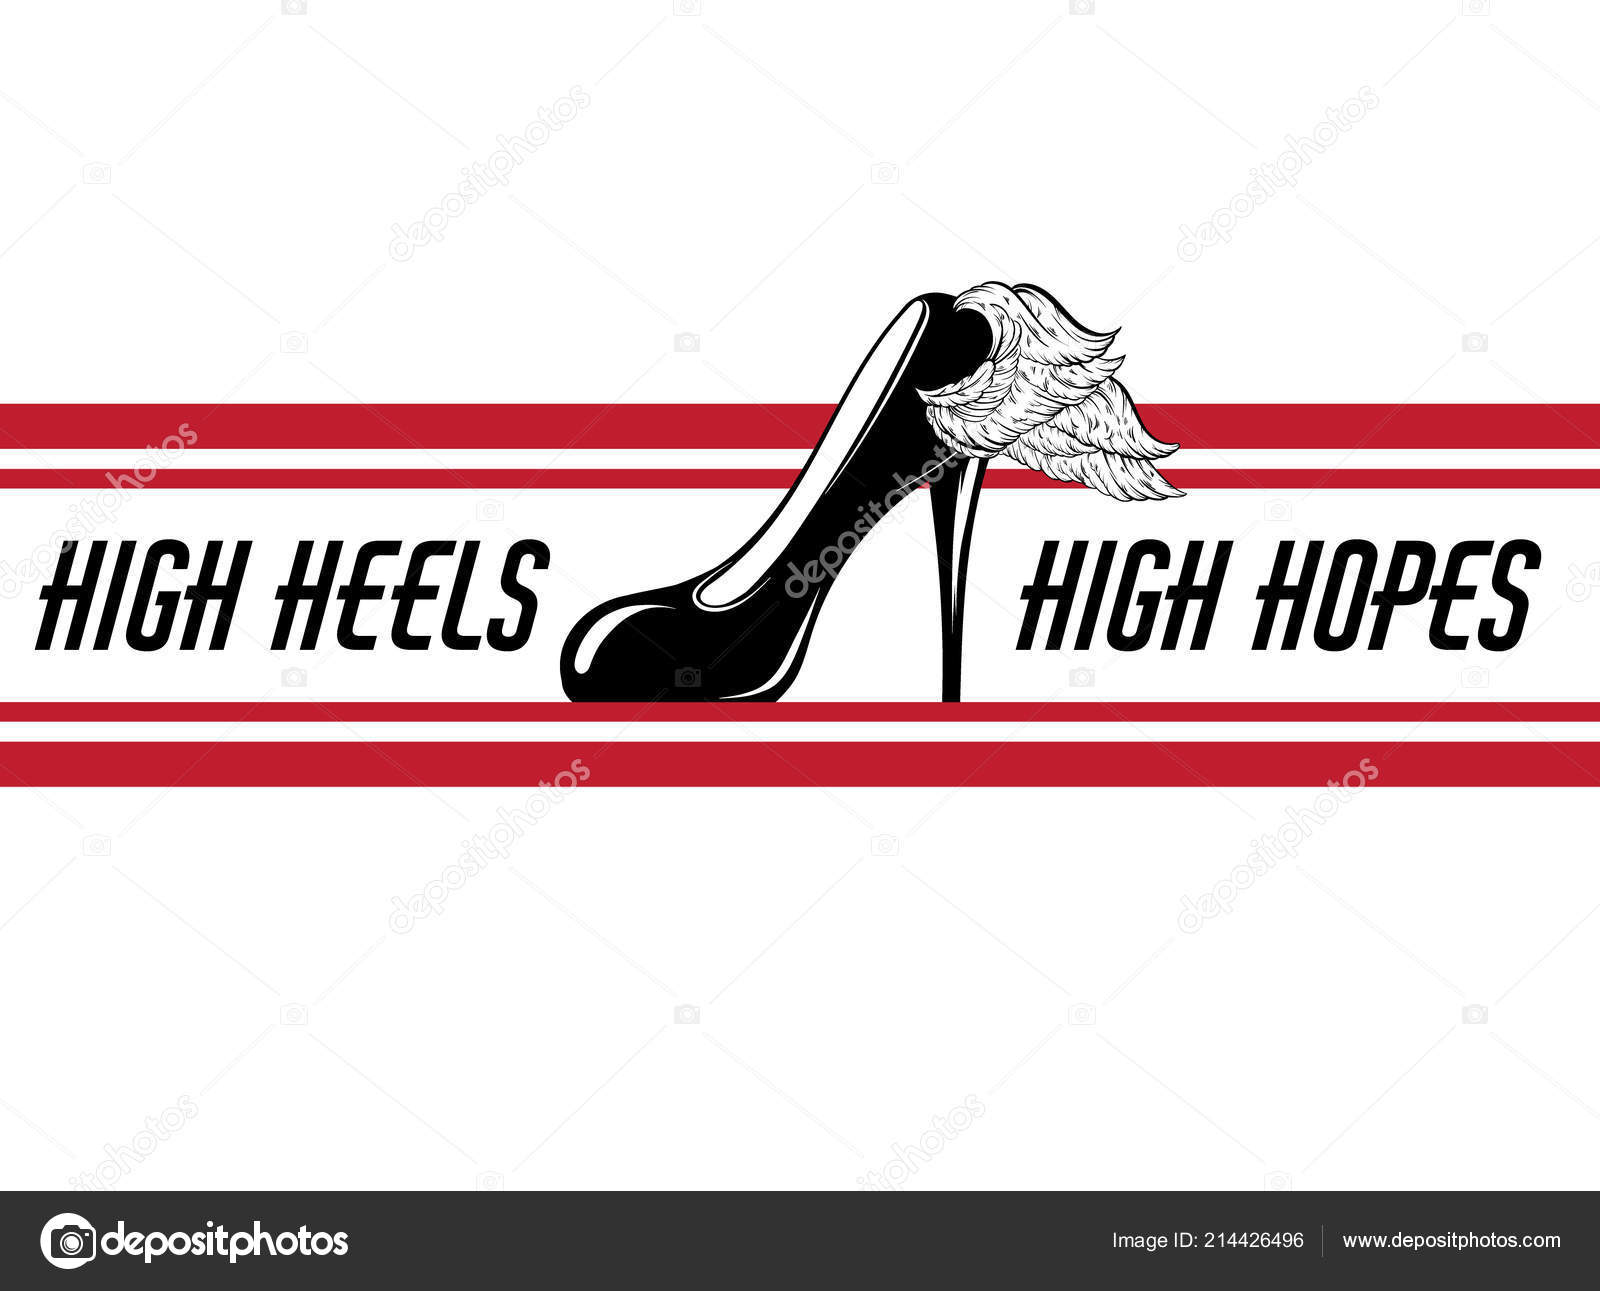 High Heels High Hopes Vector Hand Drawn Illustration Shoe Wing Pertaining To High Heel Template For Cards